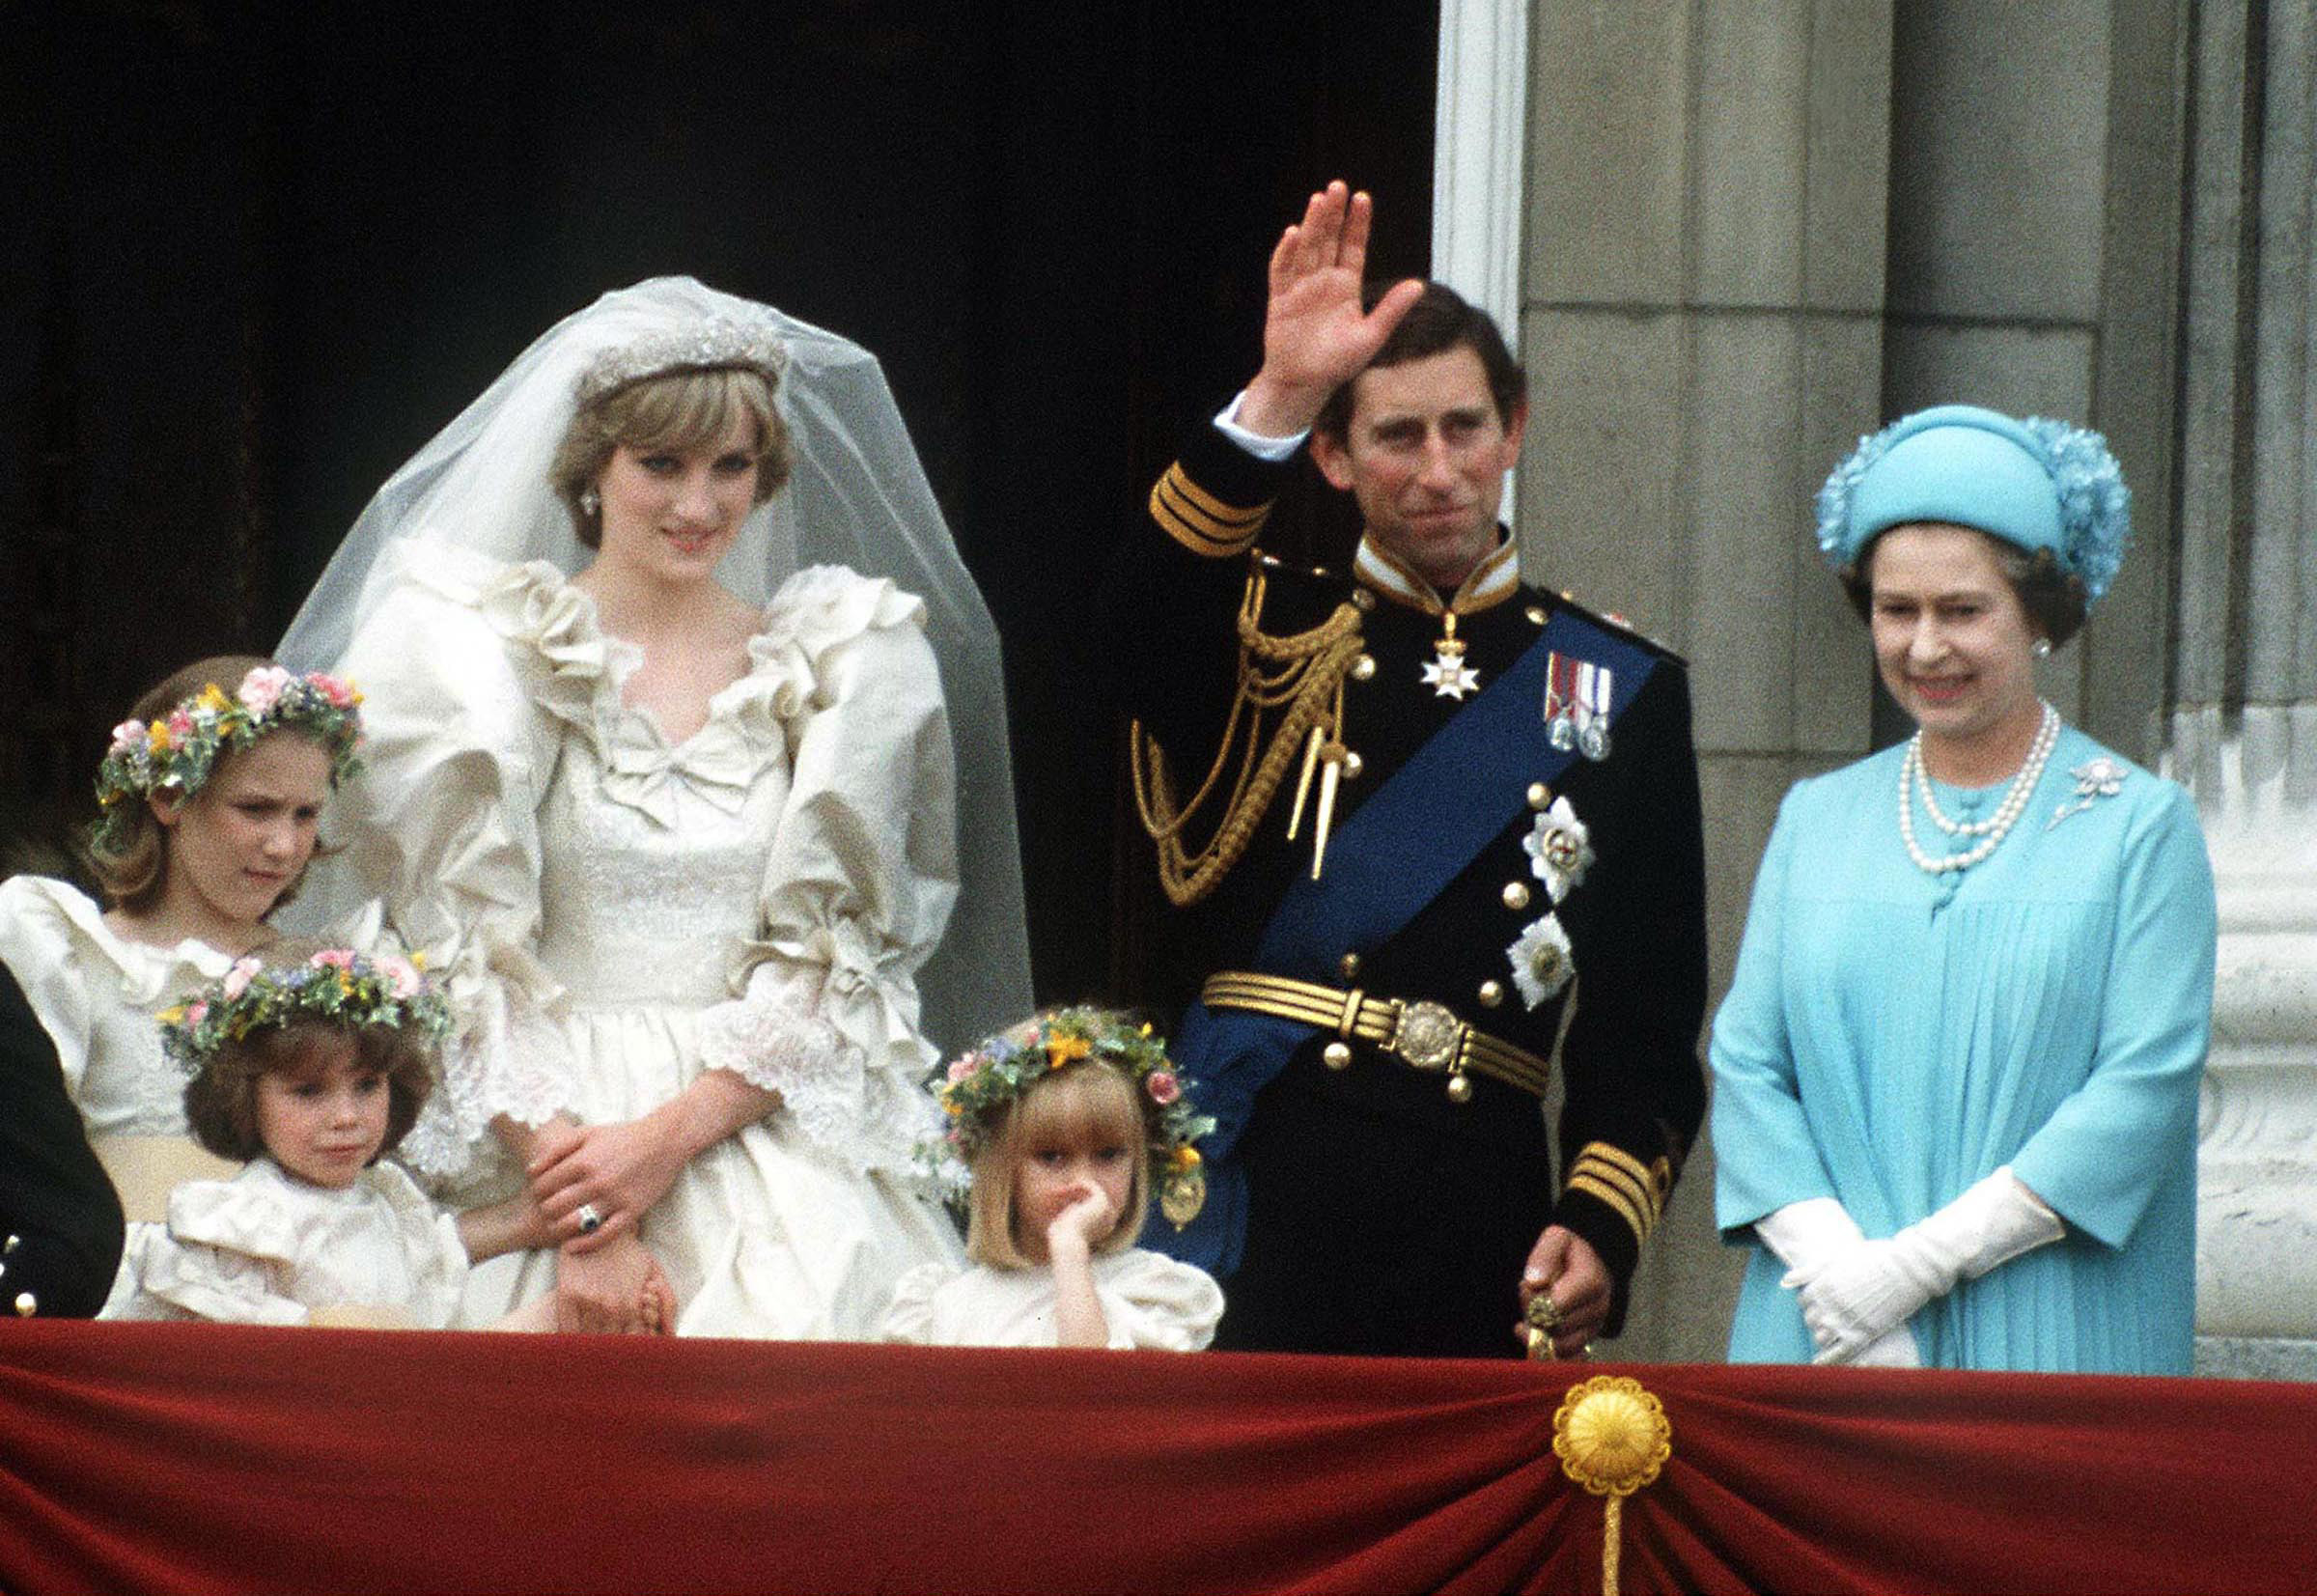 The Prince and Princess of Wales pose on the balcony of Buckingham Palace on their wedding day, with the Queen and some of the bridesmaids, 29th July 1981. (Princess Diana Archive—Getty Images)